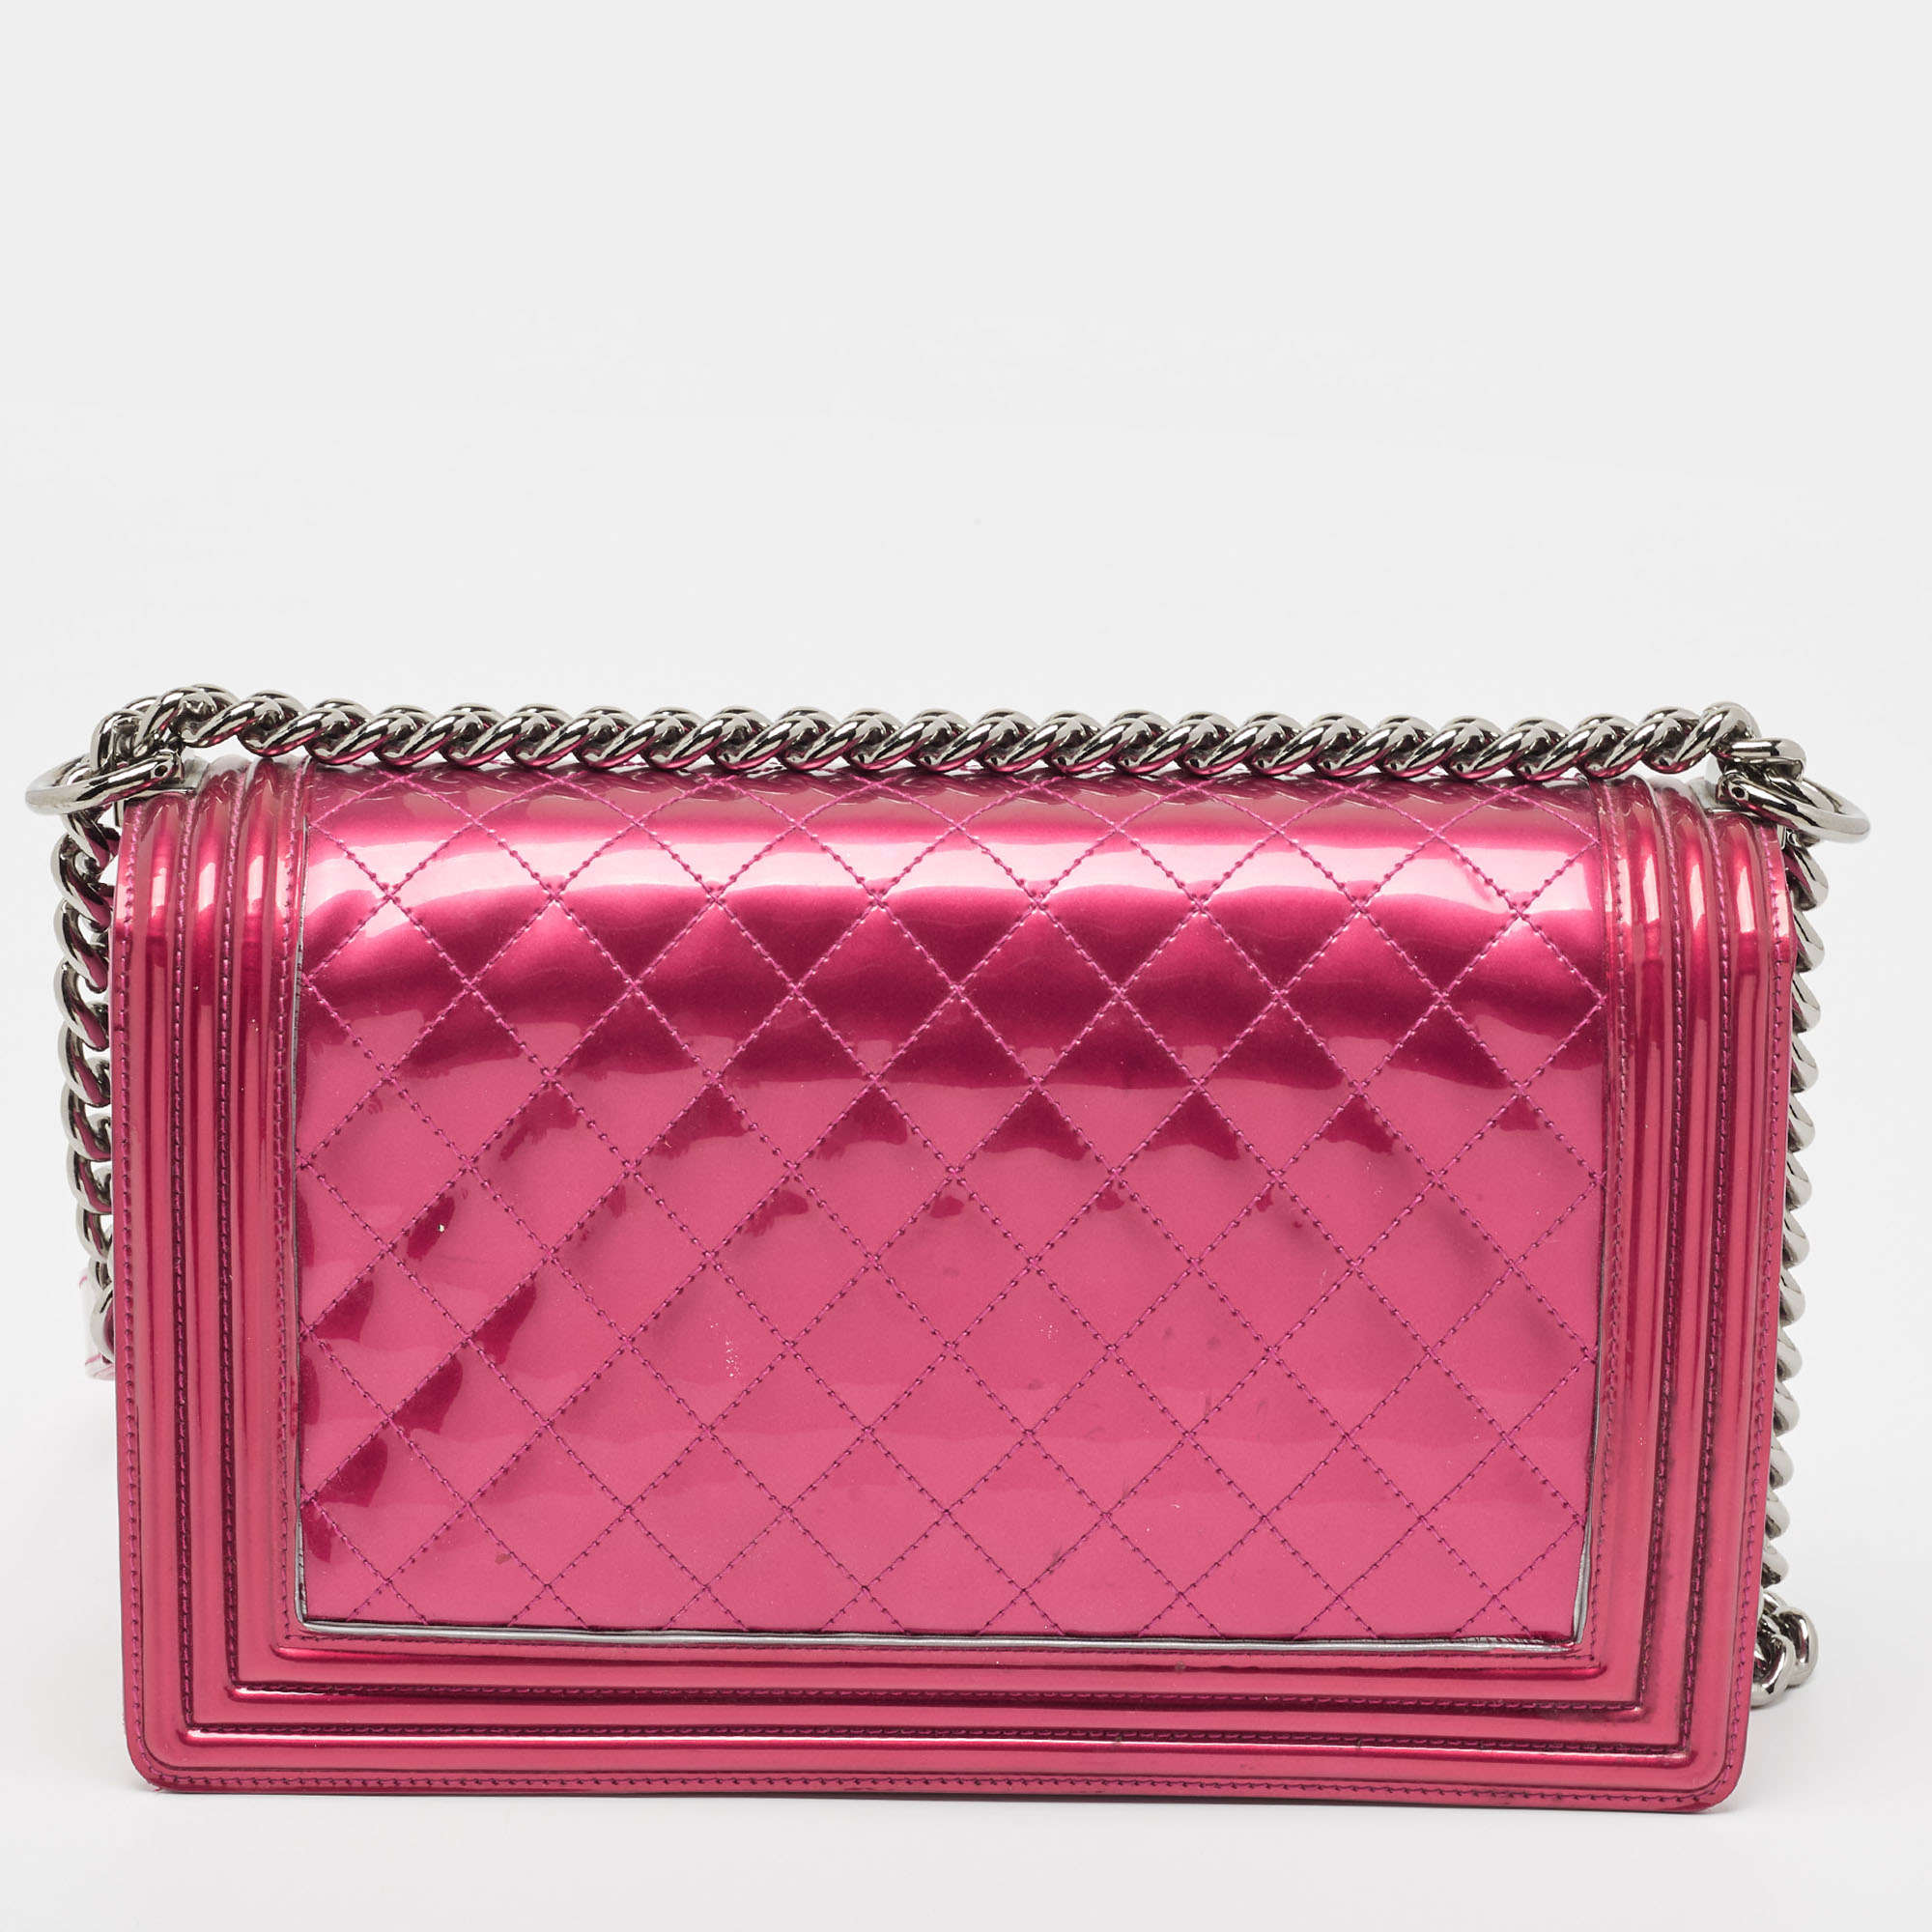 Chanel Pink Quilted Patent Leather New Medium Boy Flap Bag